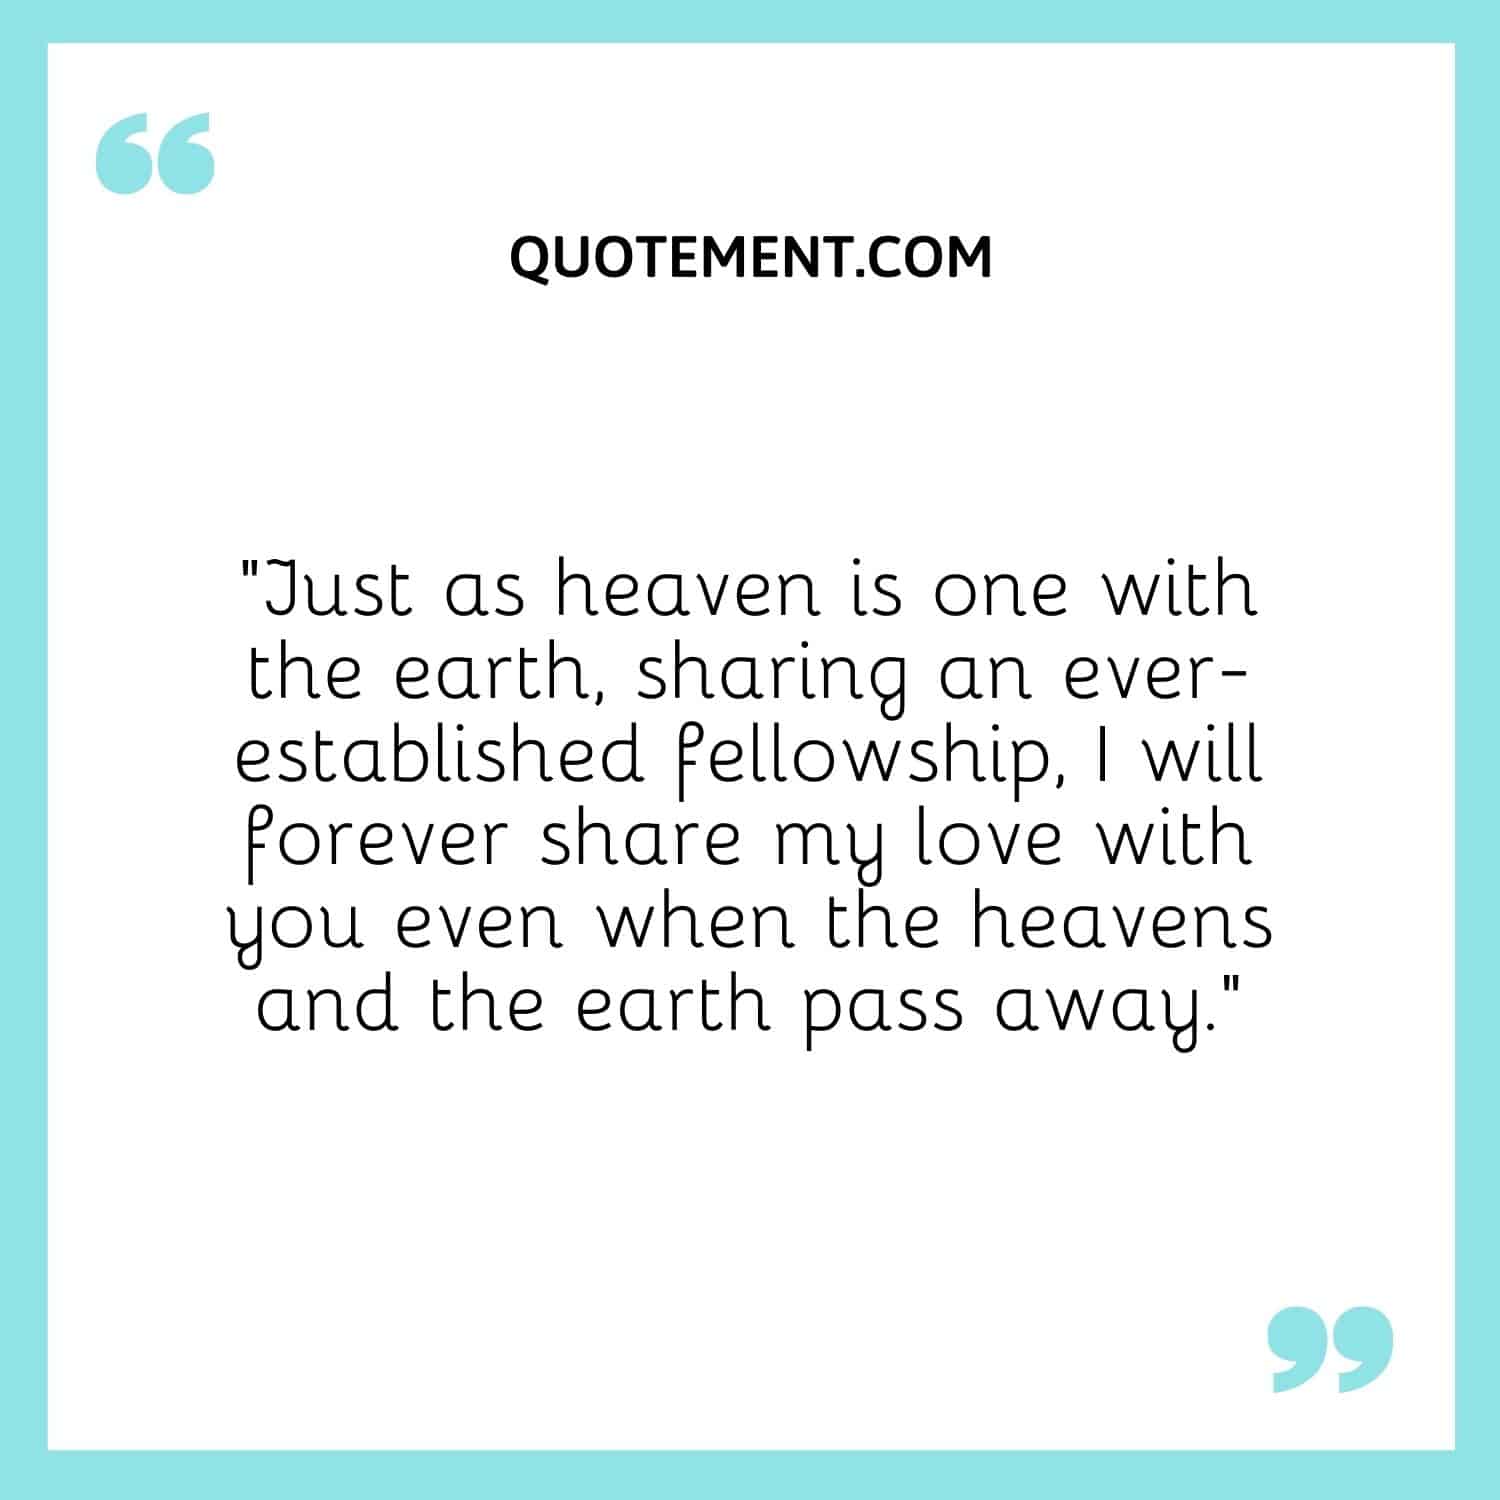 “Just as heaven is one with the earth, sharing an ever-established fellowship, I will forever share my love with you even when the heavens and the earth pass away.”